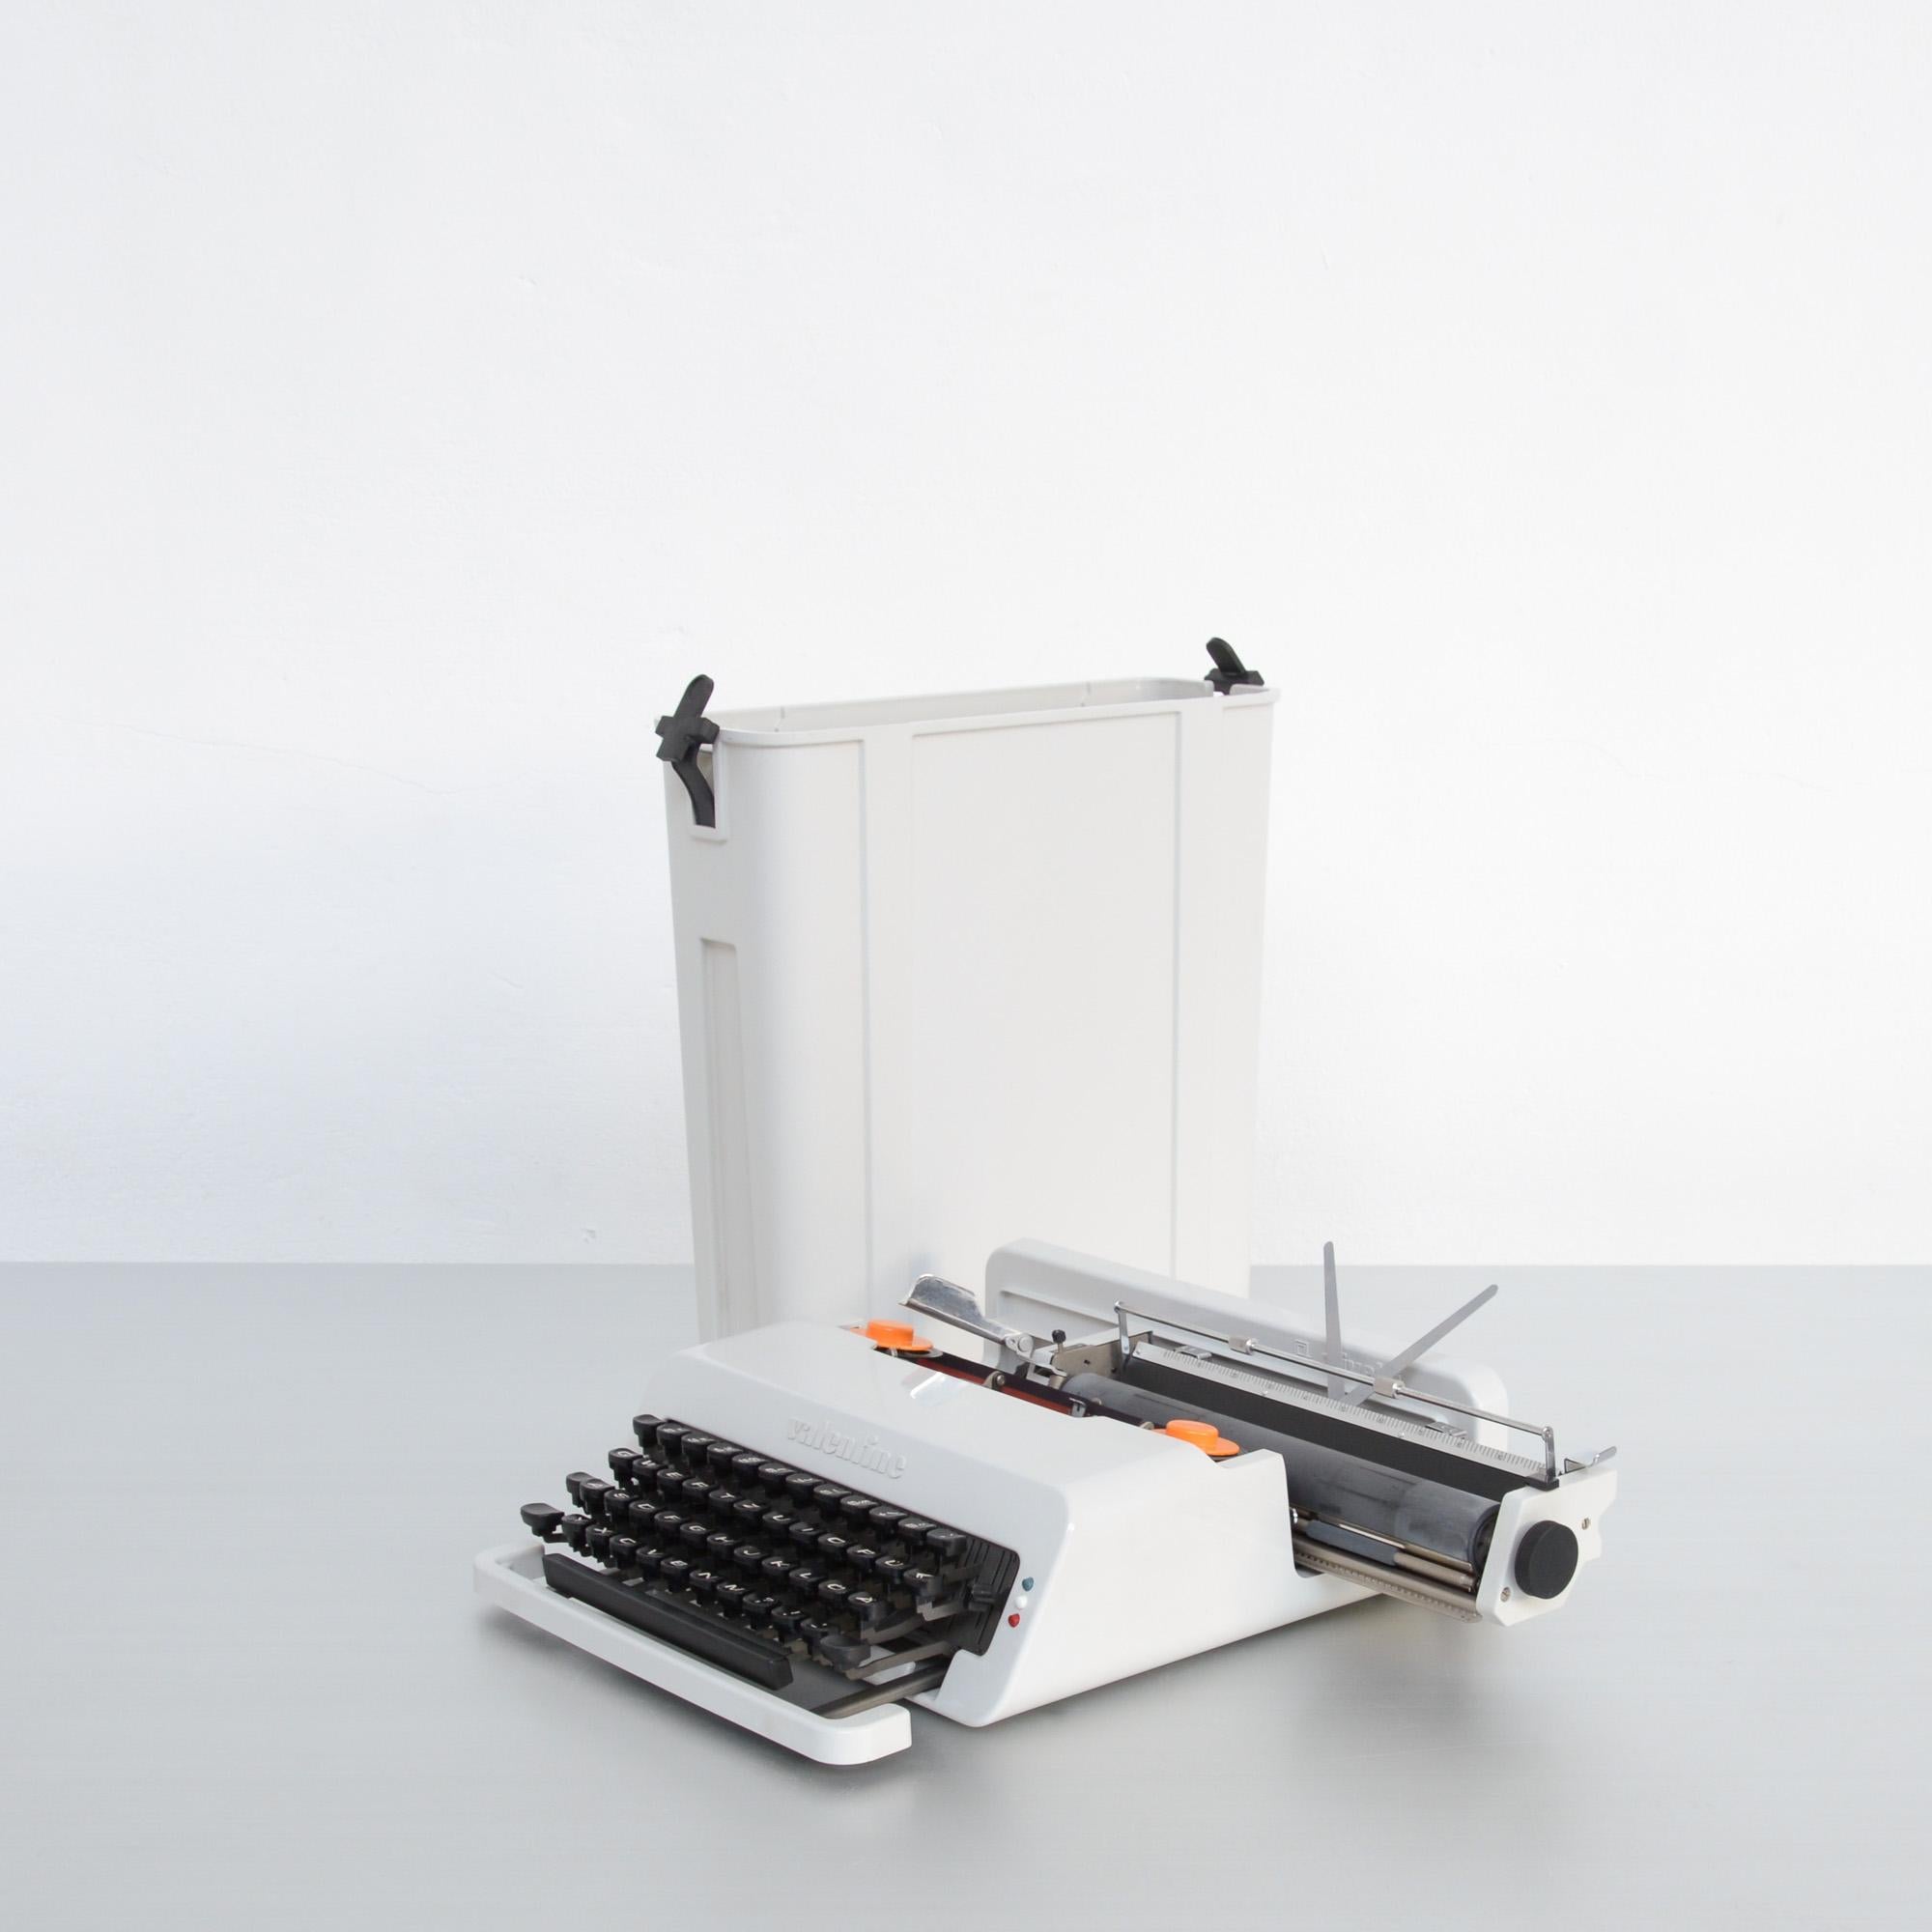 The ‘Valentine’ typewriter was designed by Ettore Sottsass for Olivetti, Italy in 1969. This first edition was produced in Barcelona, the second edition was manufactured in Mexico.
The Valentine typewriter was launched on 14 February 1969, that